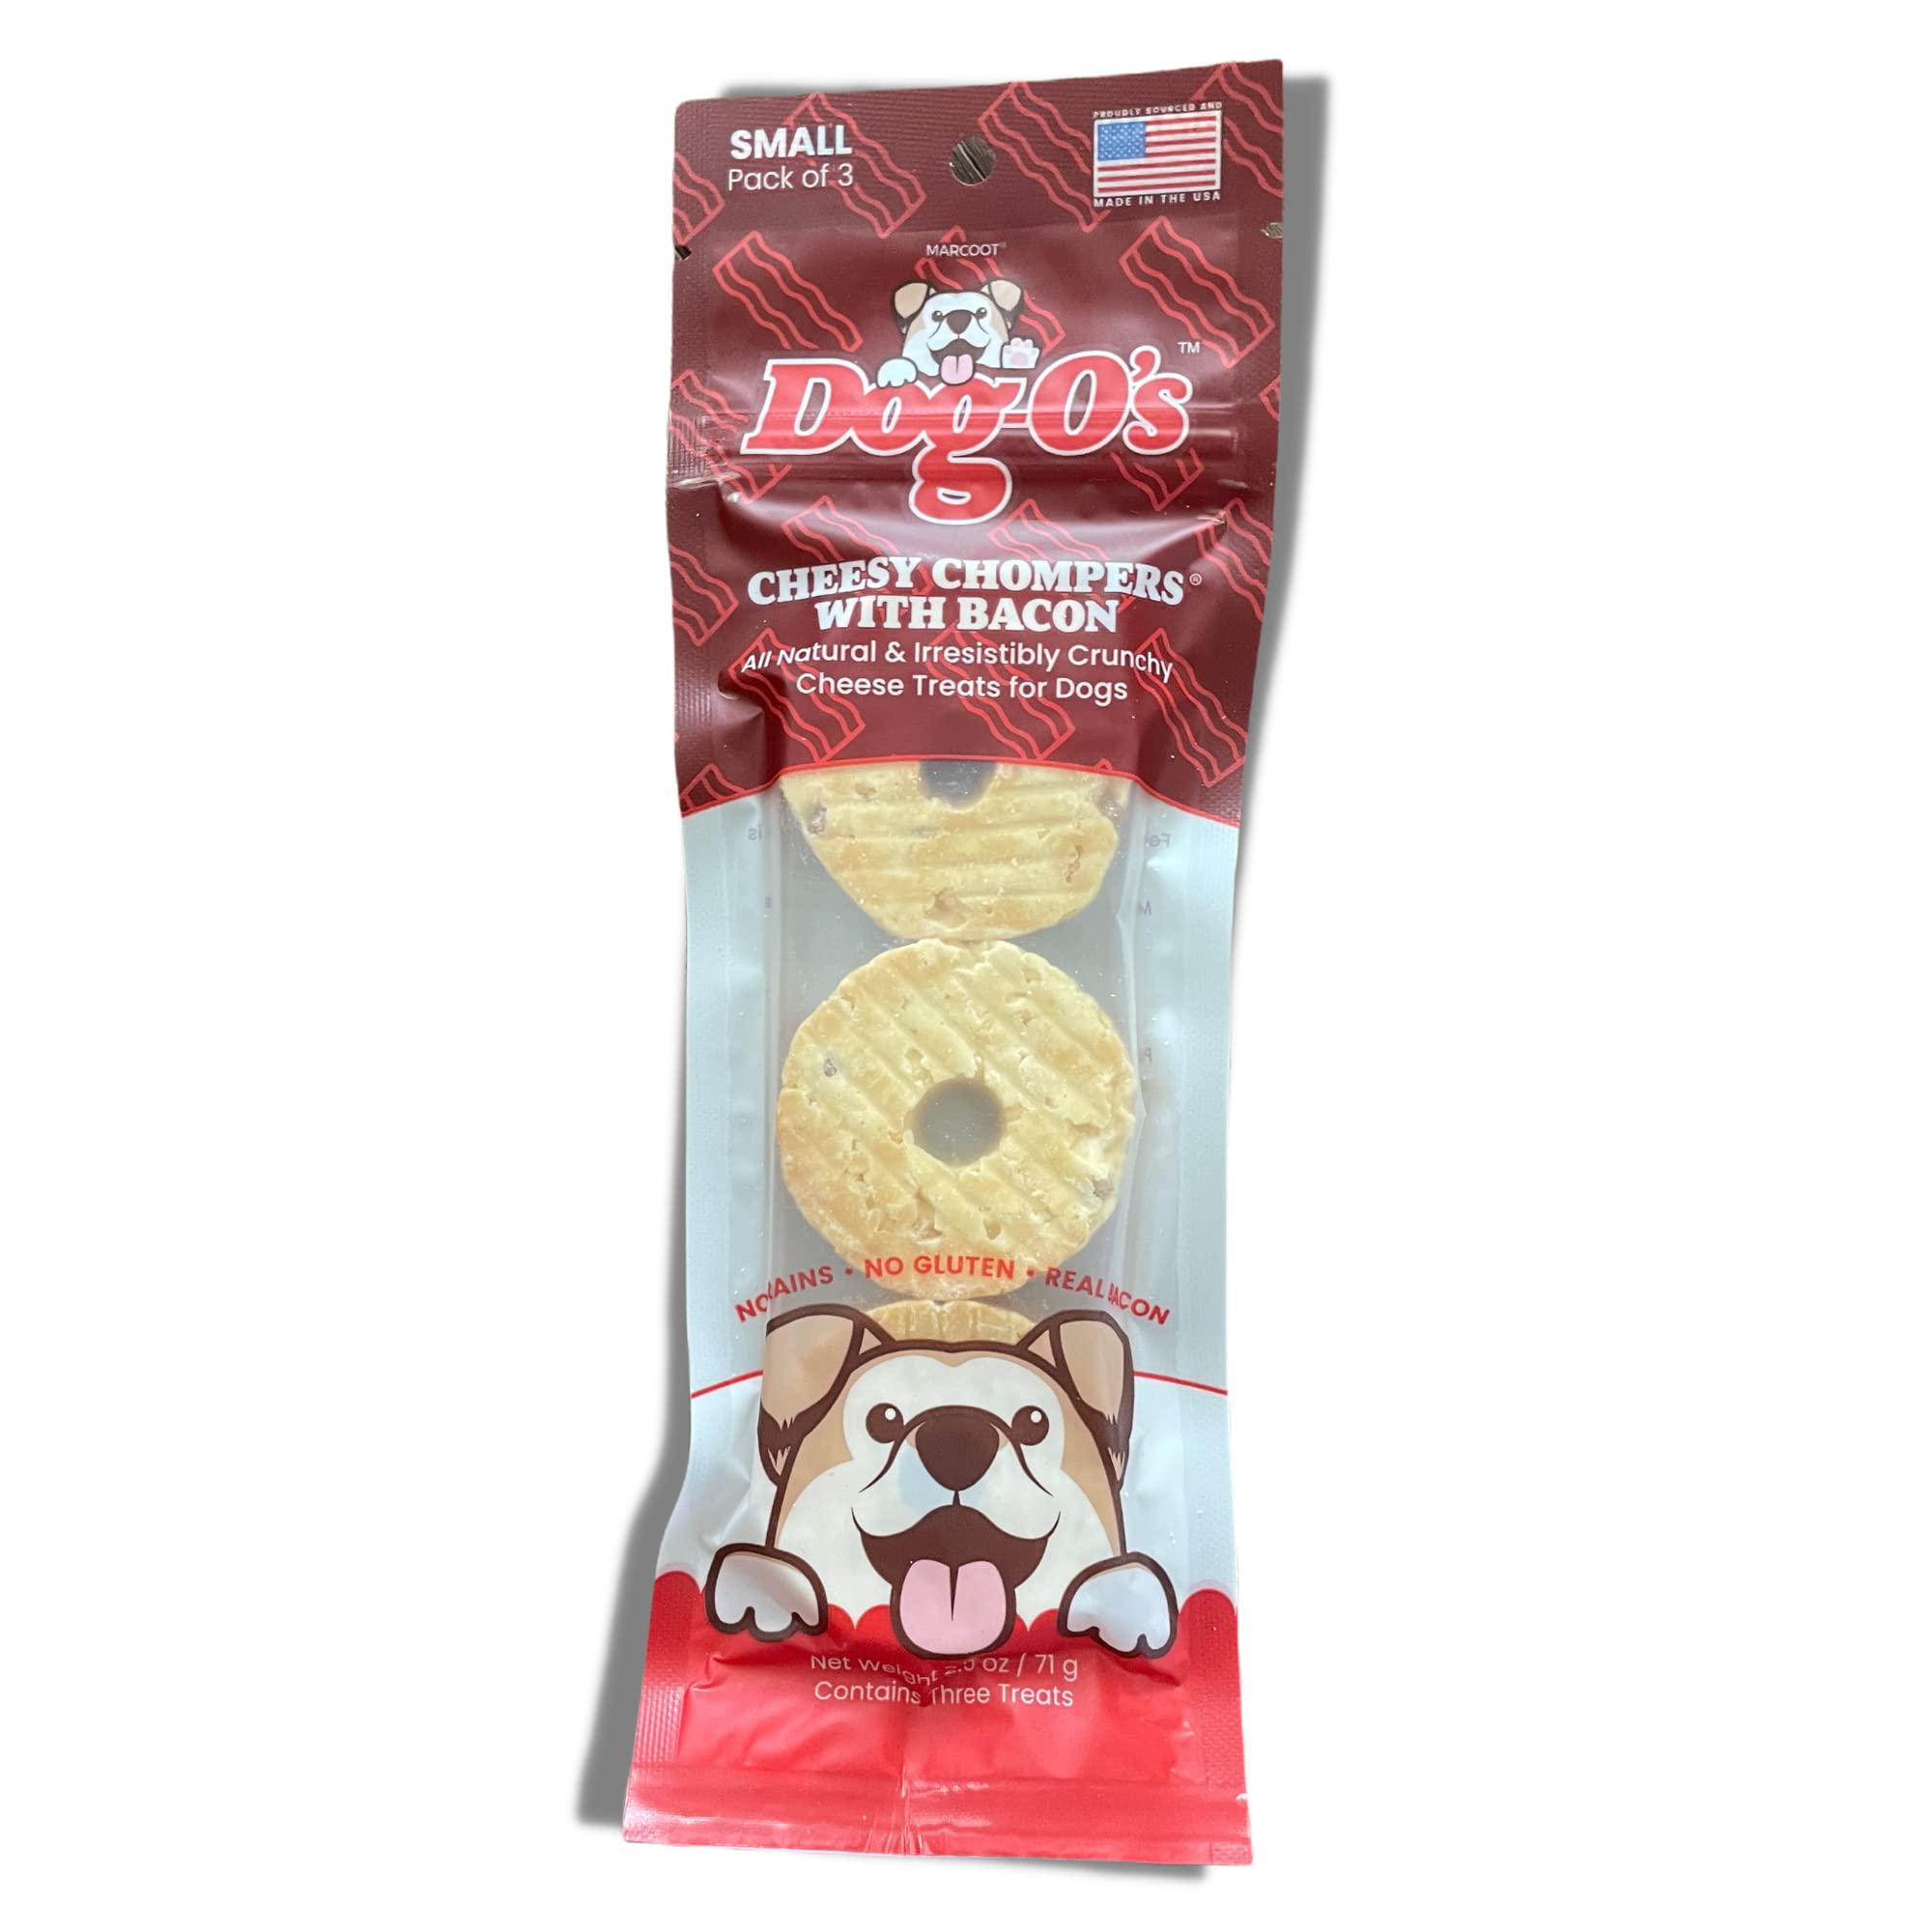 dog-o\'s cheesy chompers dog-o's cheesy chompers, bacon, all-natural, made in the usa, grain free, gluten free, real cheese treats for small dogs (pac